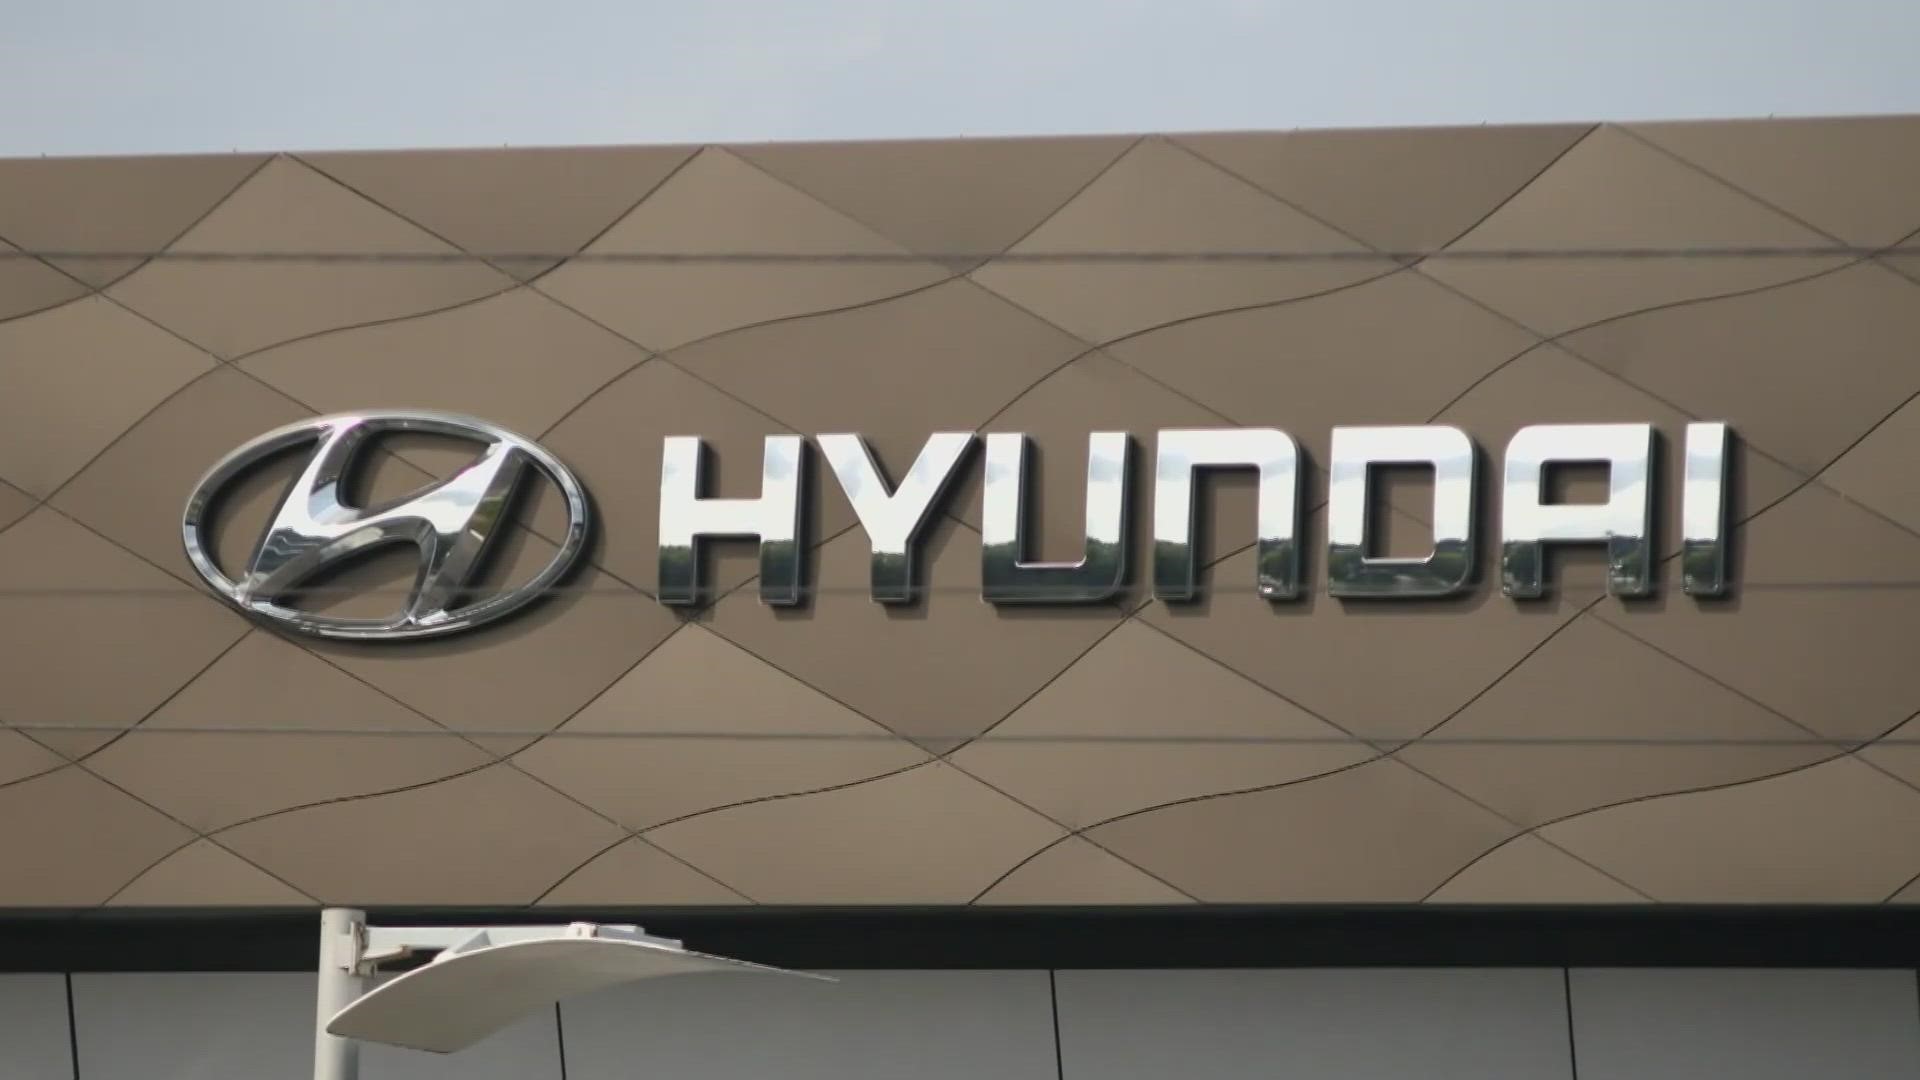 Kia and Hyundai spokespeople have told Eyewitness News that it is working on a software fix for its easily stolen cars.